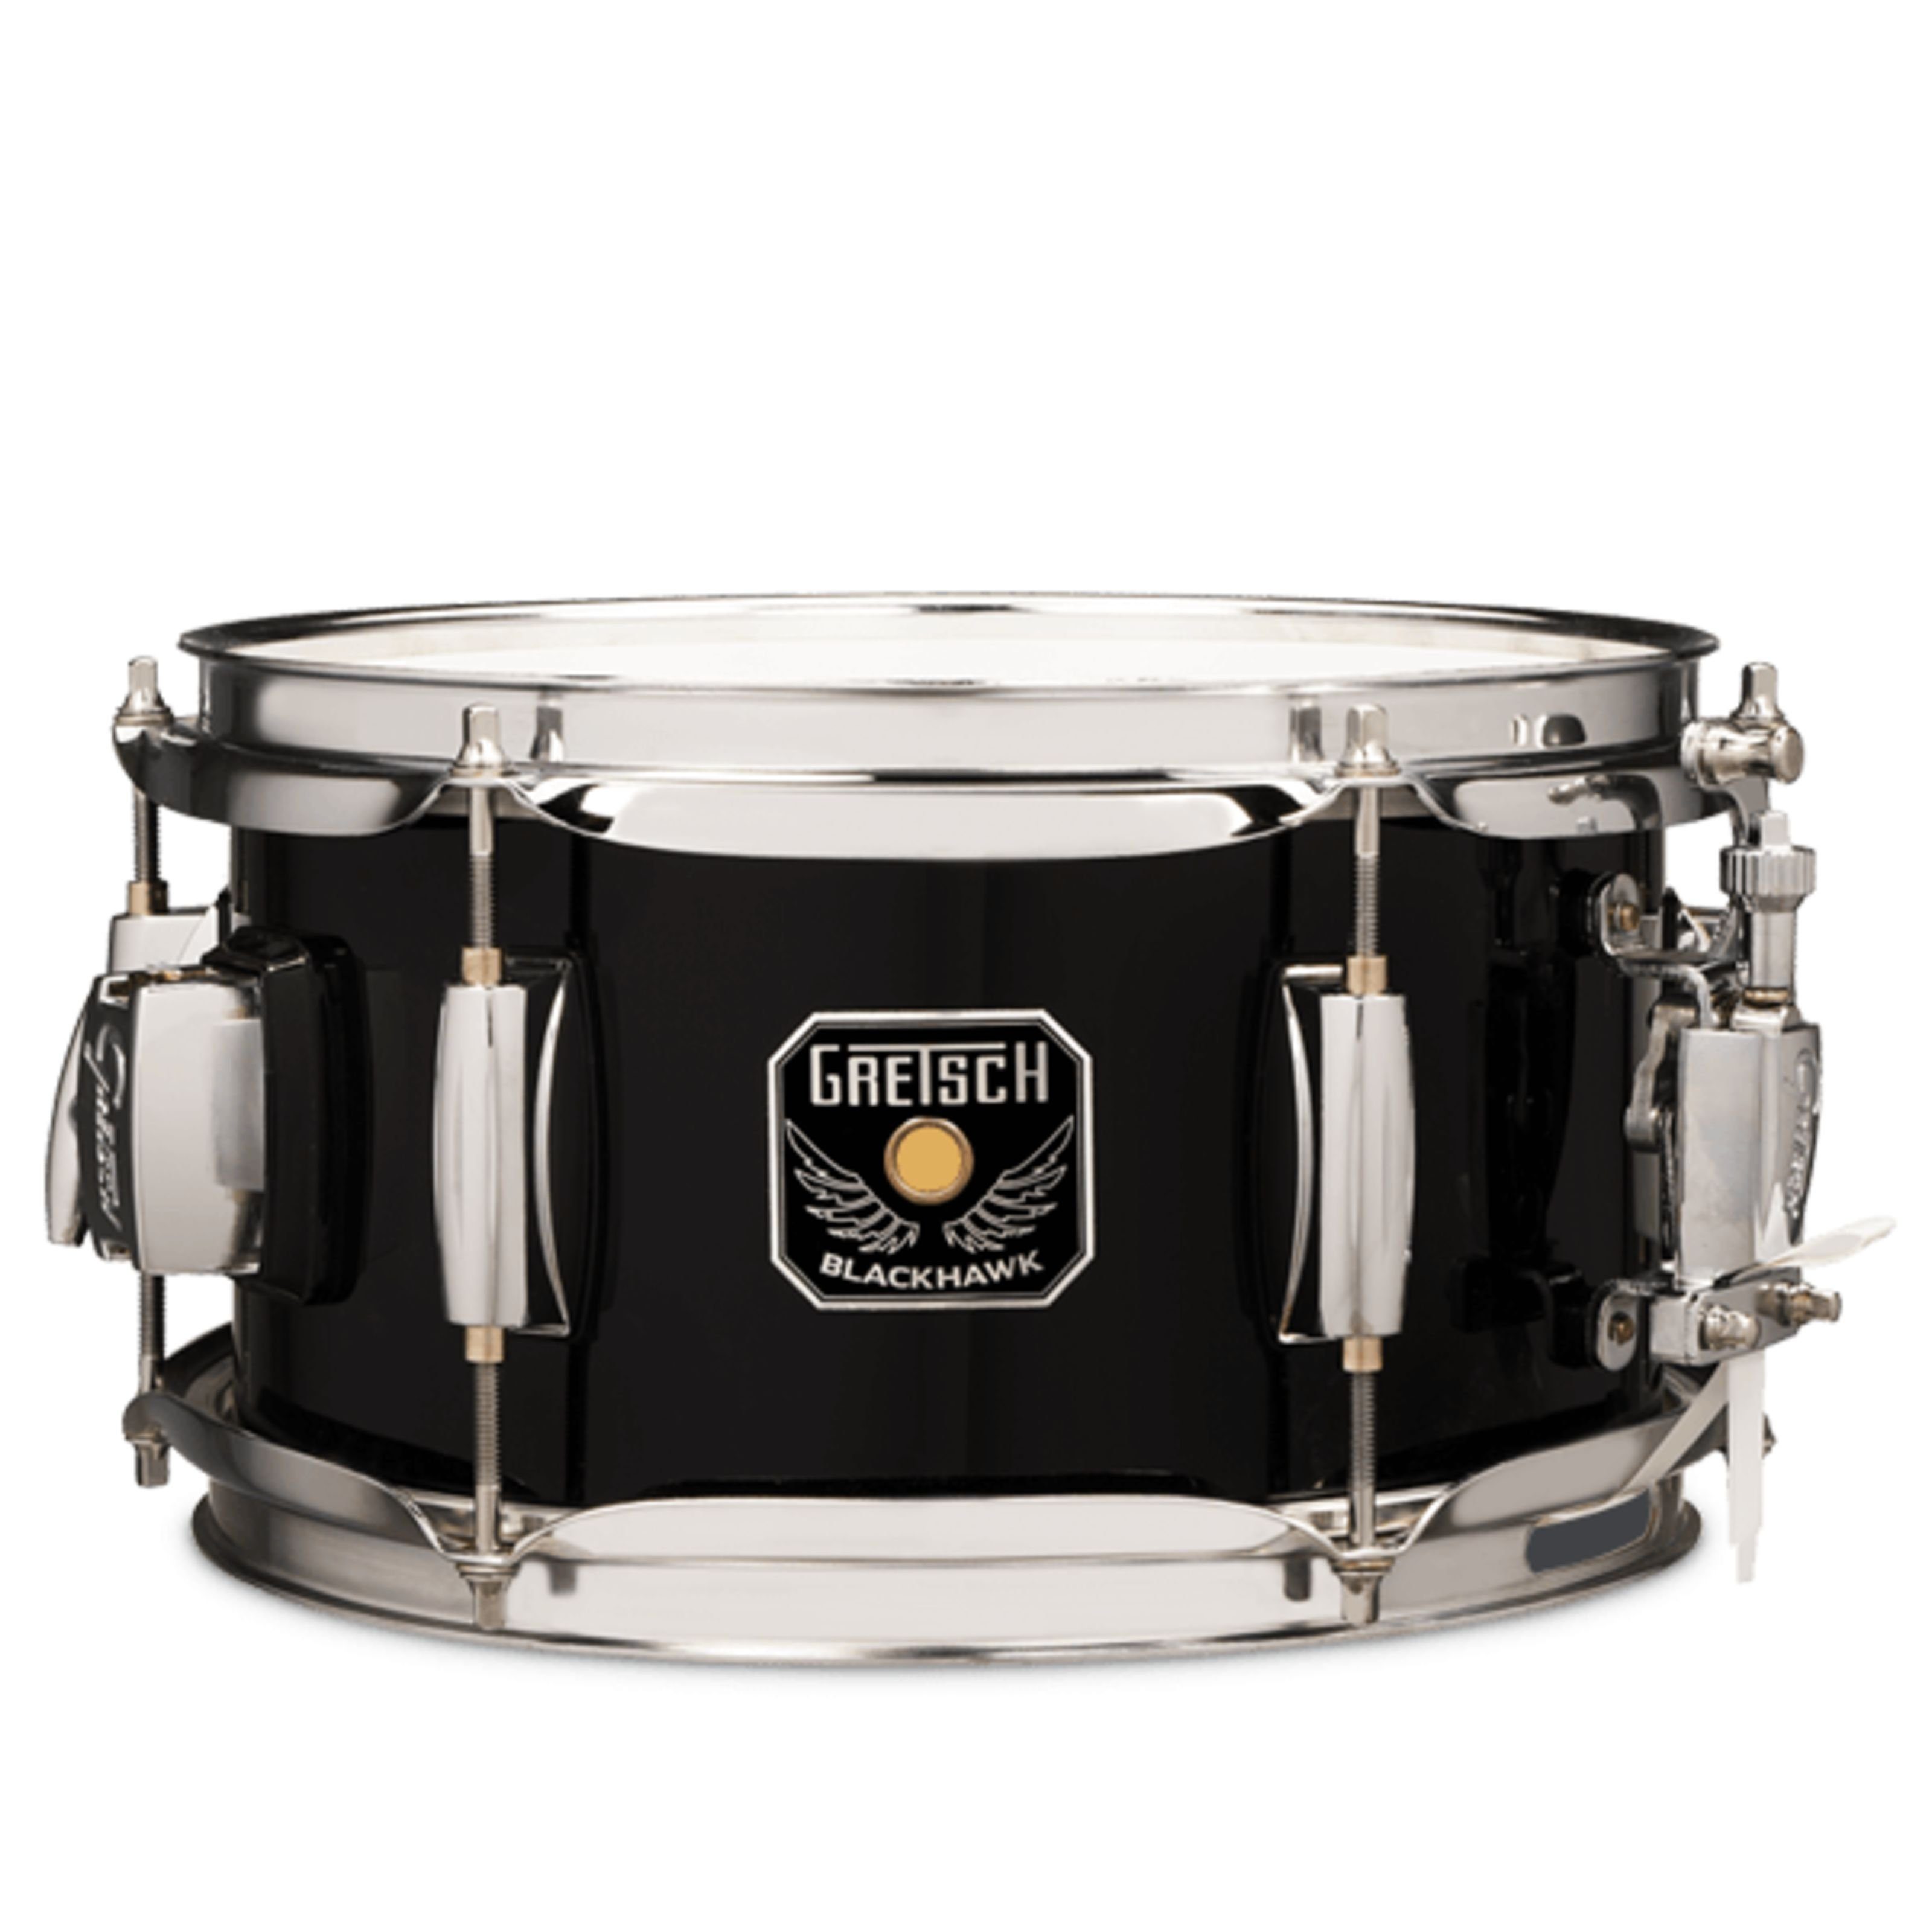 Gretsch Snare Drum,Mighty Mini Snare 10"x5,5", Black, incl. GTS Mount, Schlagzeuge, Snare Drums, Mighty Mini Snare 10"x5,5" Black GTS Mount - Snare Drum